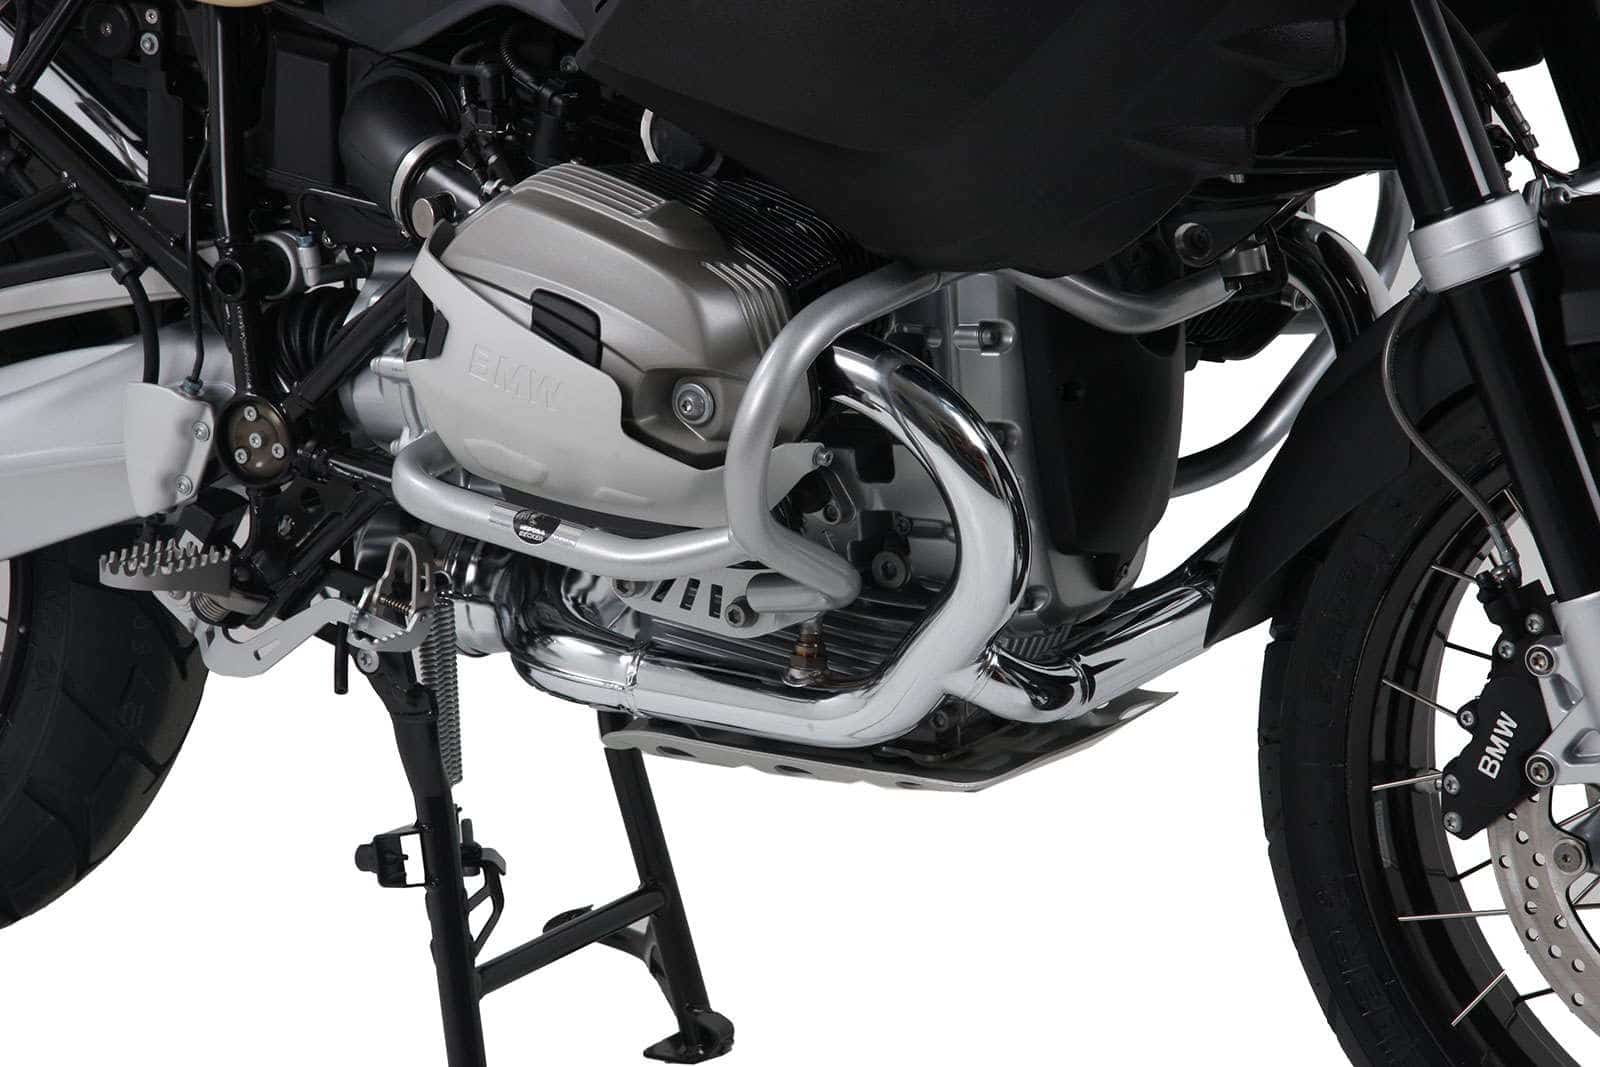 Hepco & Becker Accessories for BMW R 1200 GS (2008-2012)